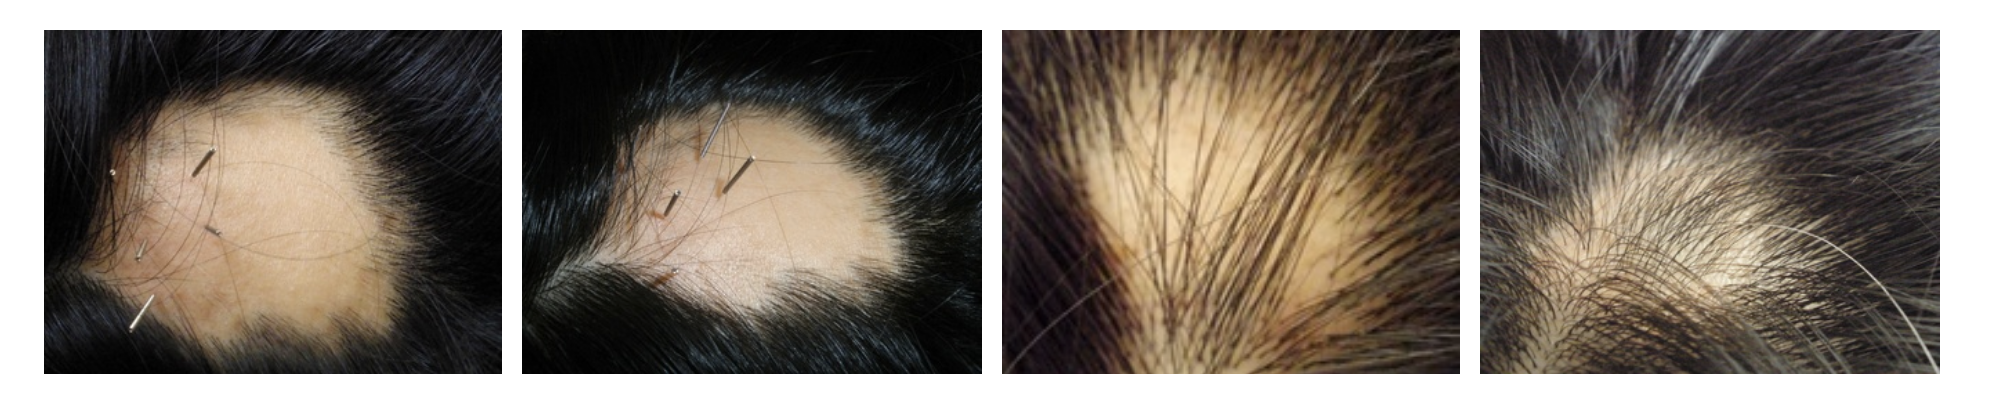 HAIR LOSS ACUPUNCTURE TREATMENT Lake Forest Irvine CA, Soo Health care -  Soo Health Care